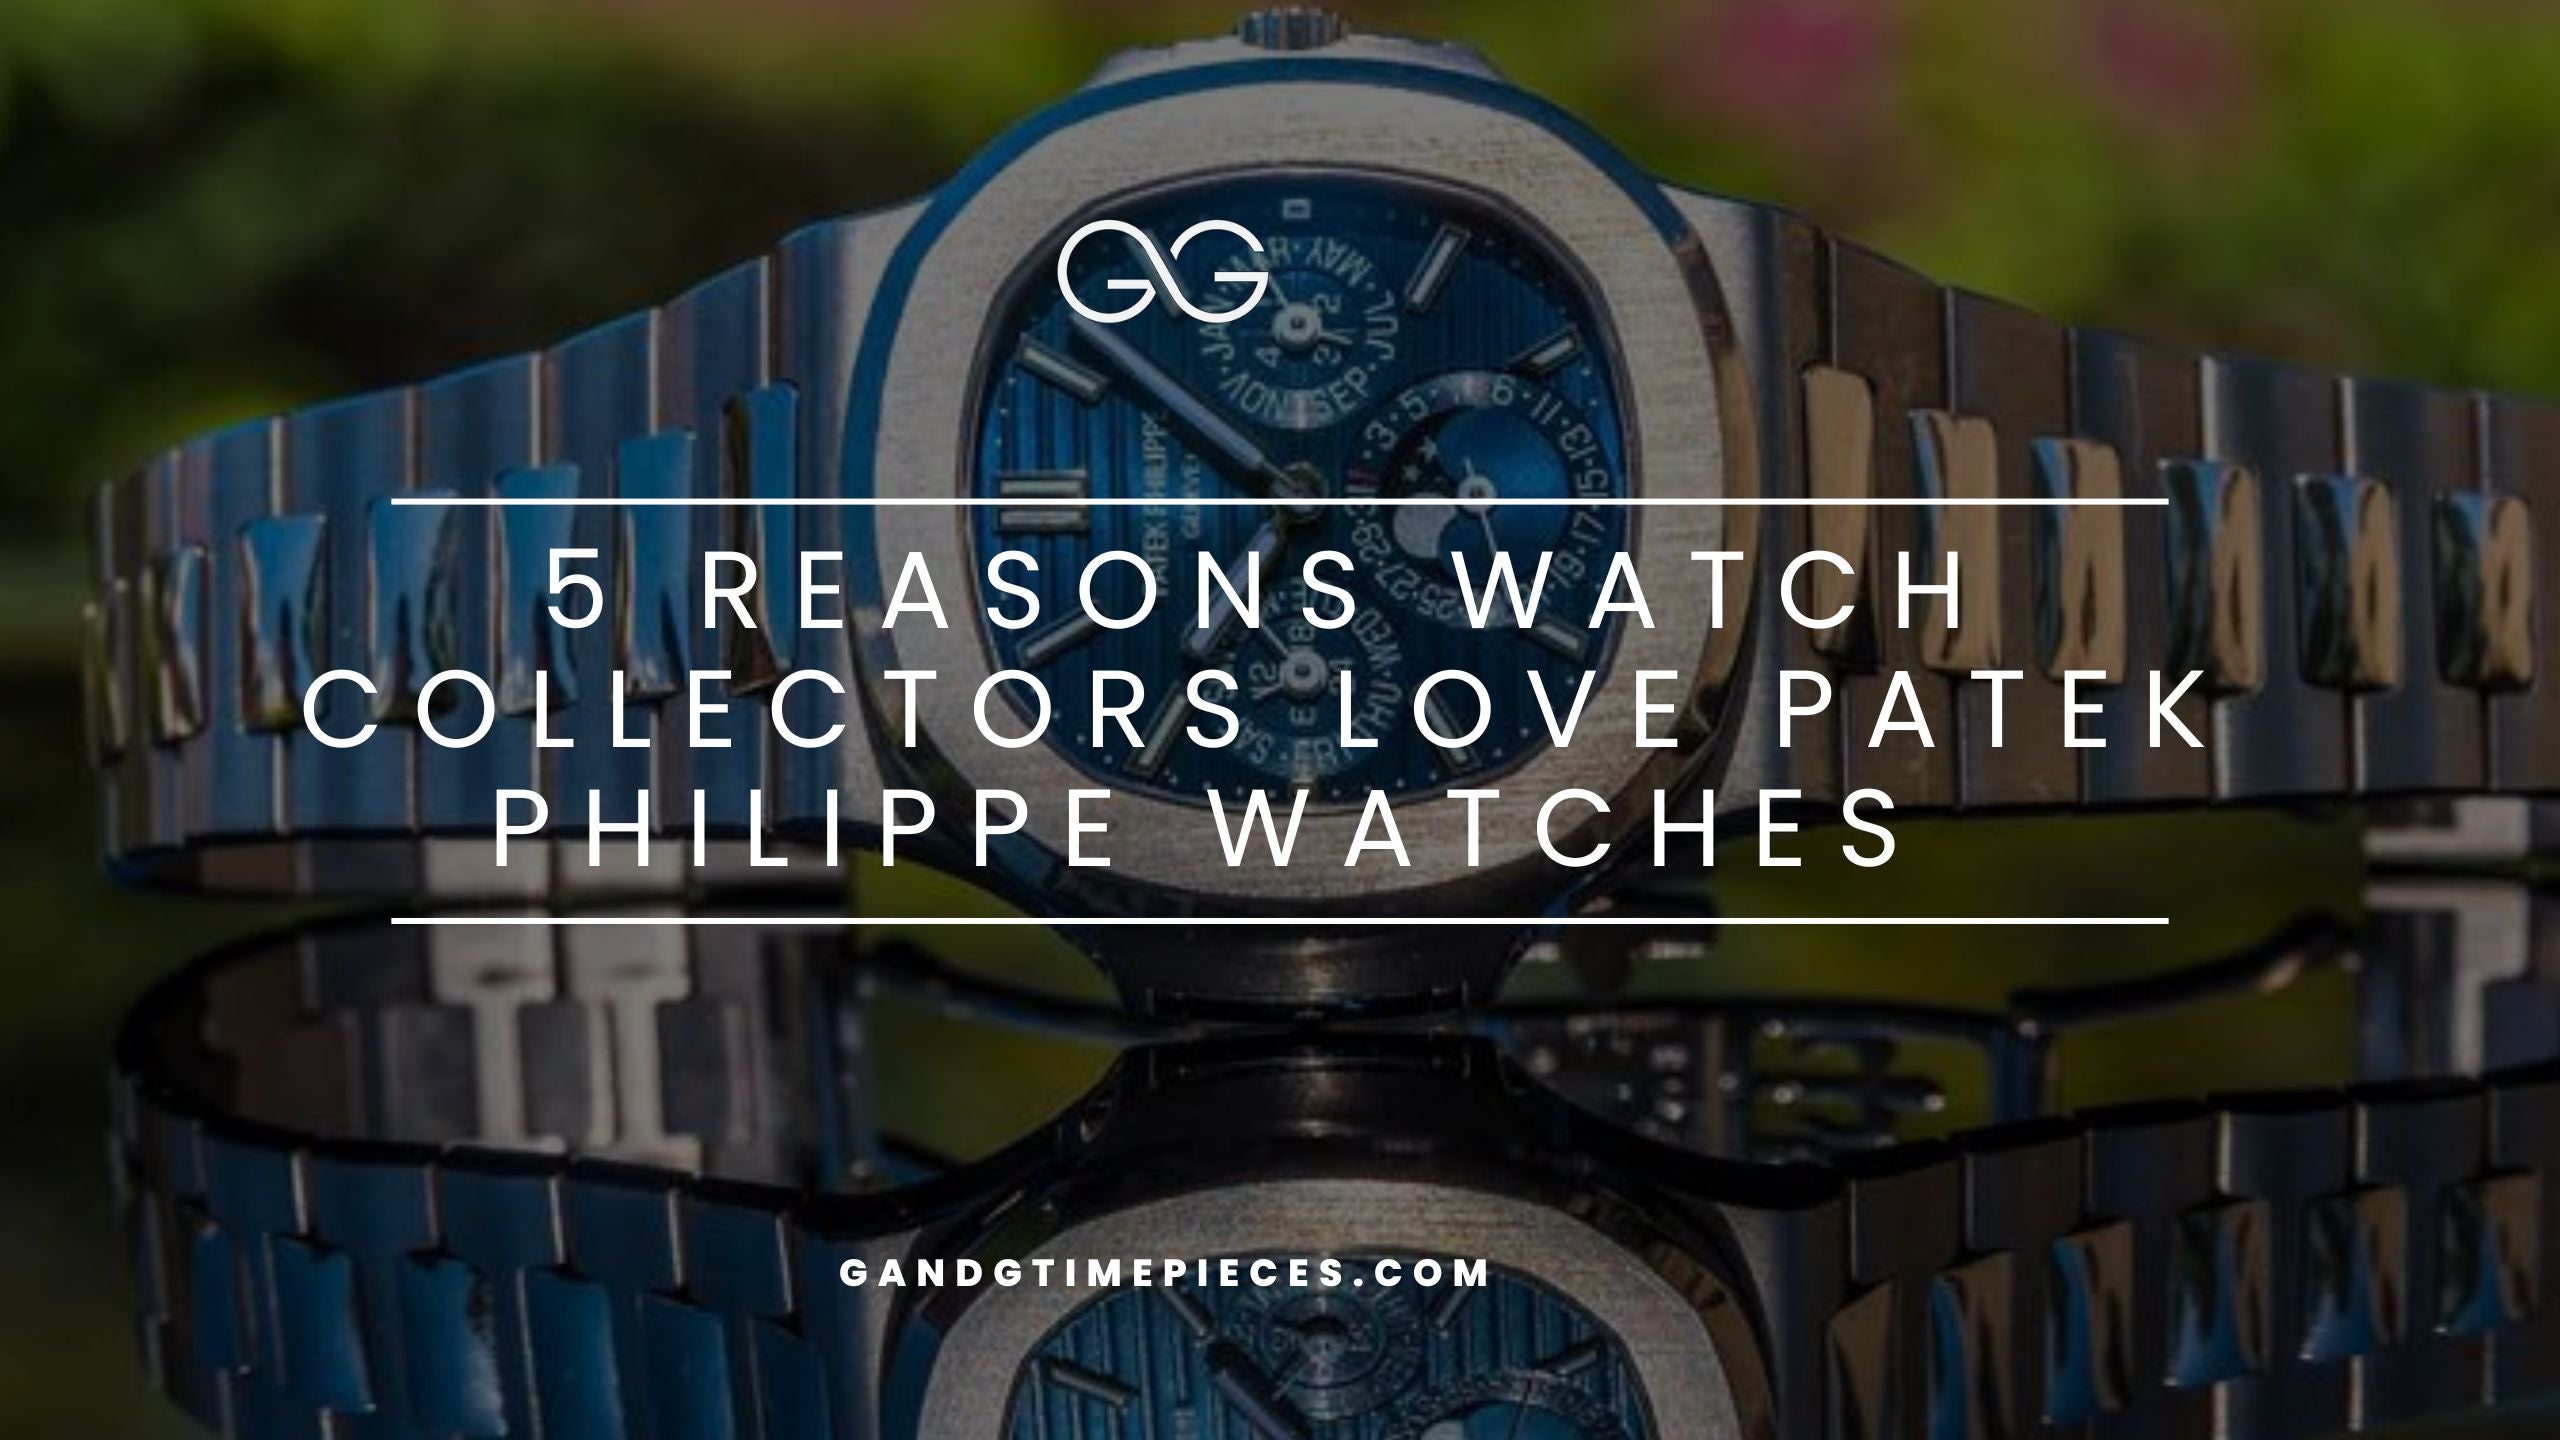 5 Reasons Watch Collectors Love Patek Philippe Watches